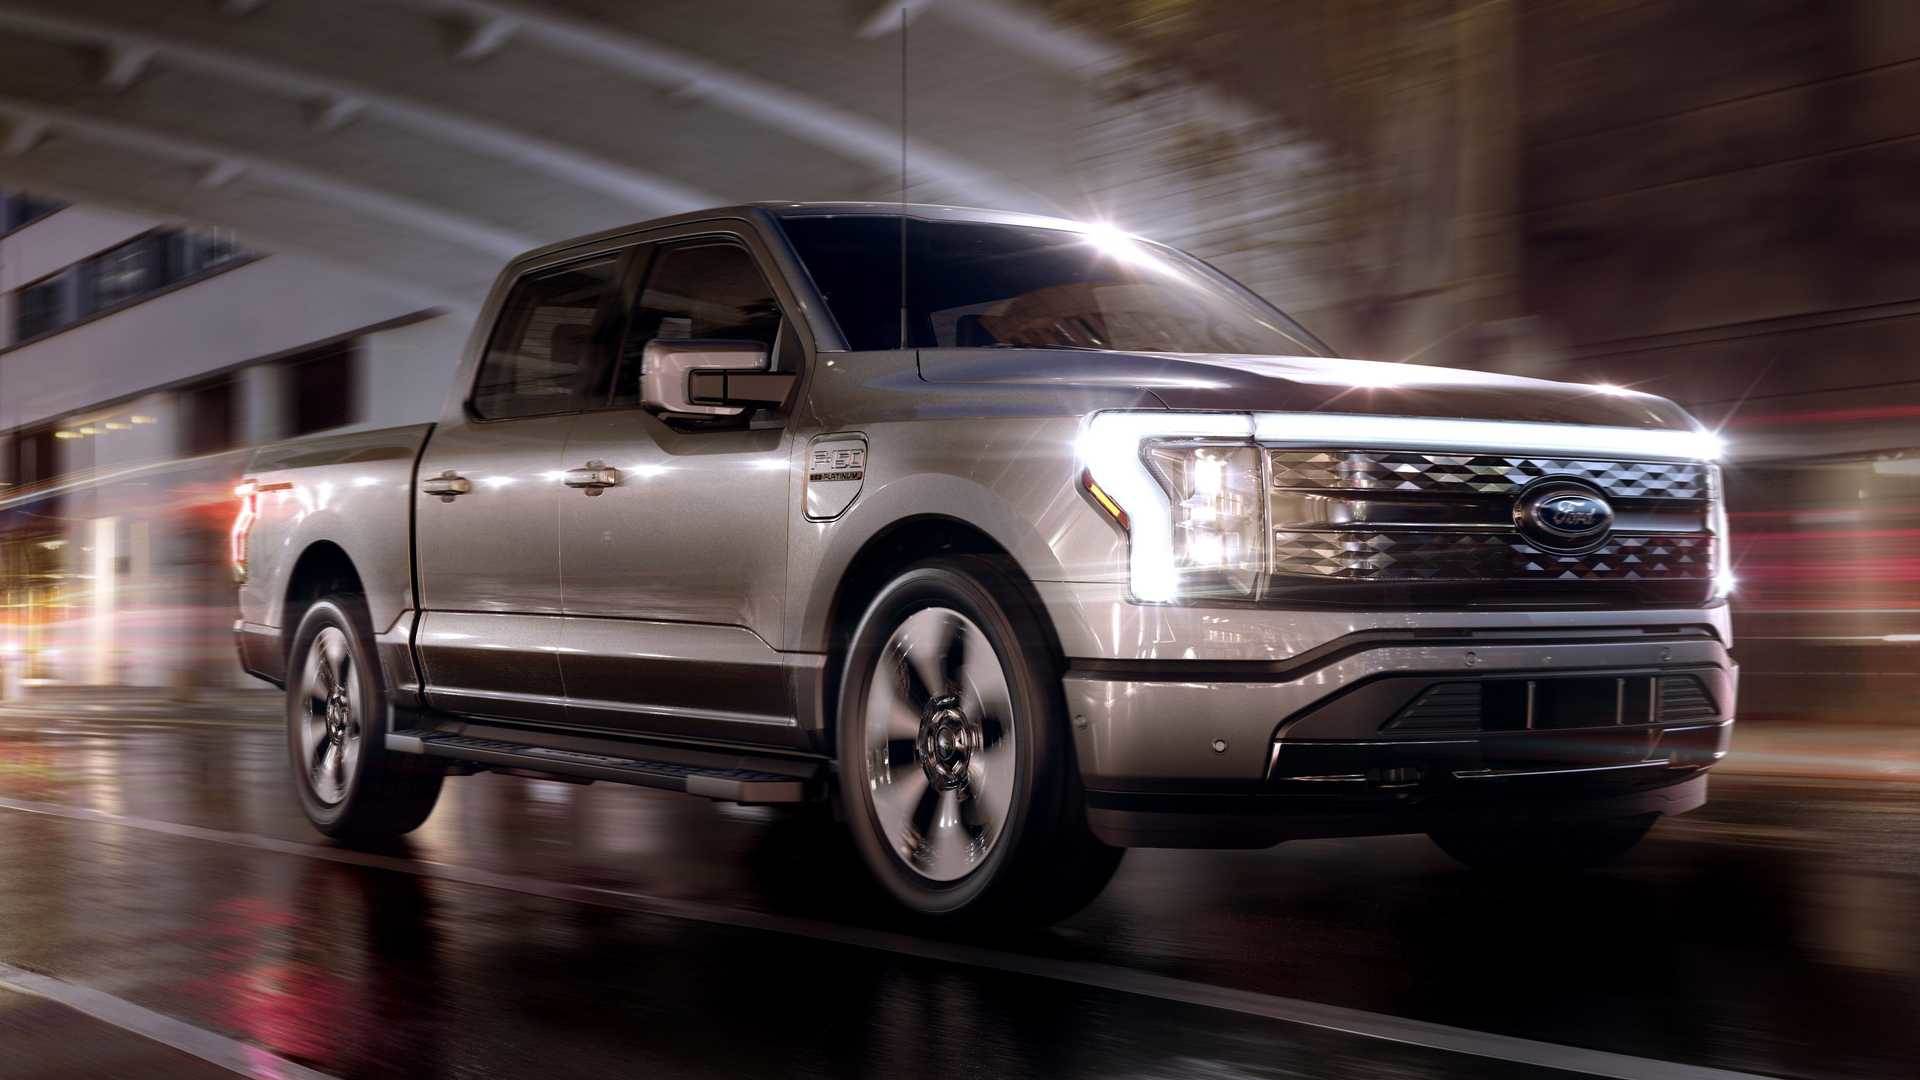 Ford's electric F-150 Lightning pickup truck is here